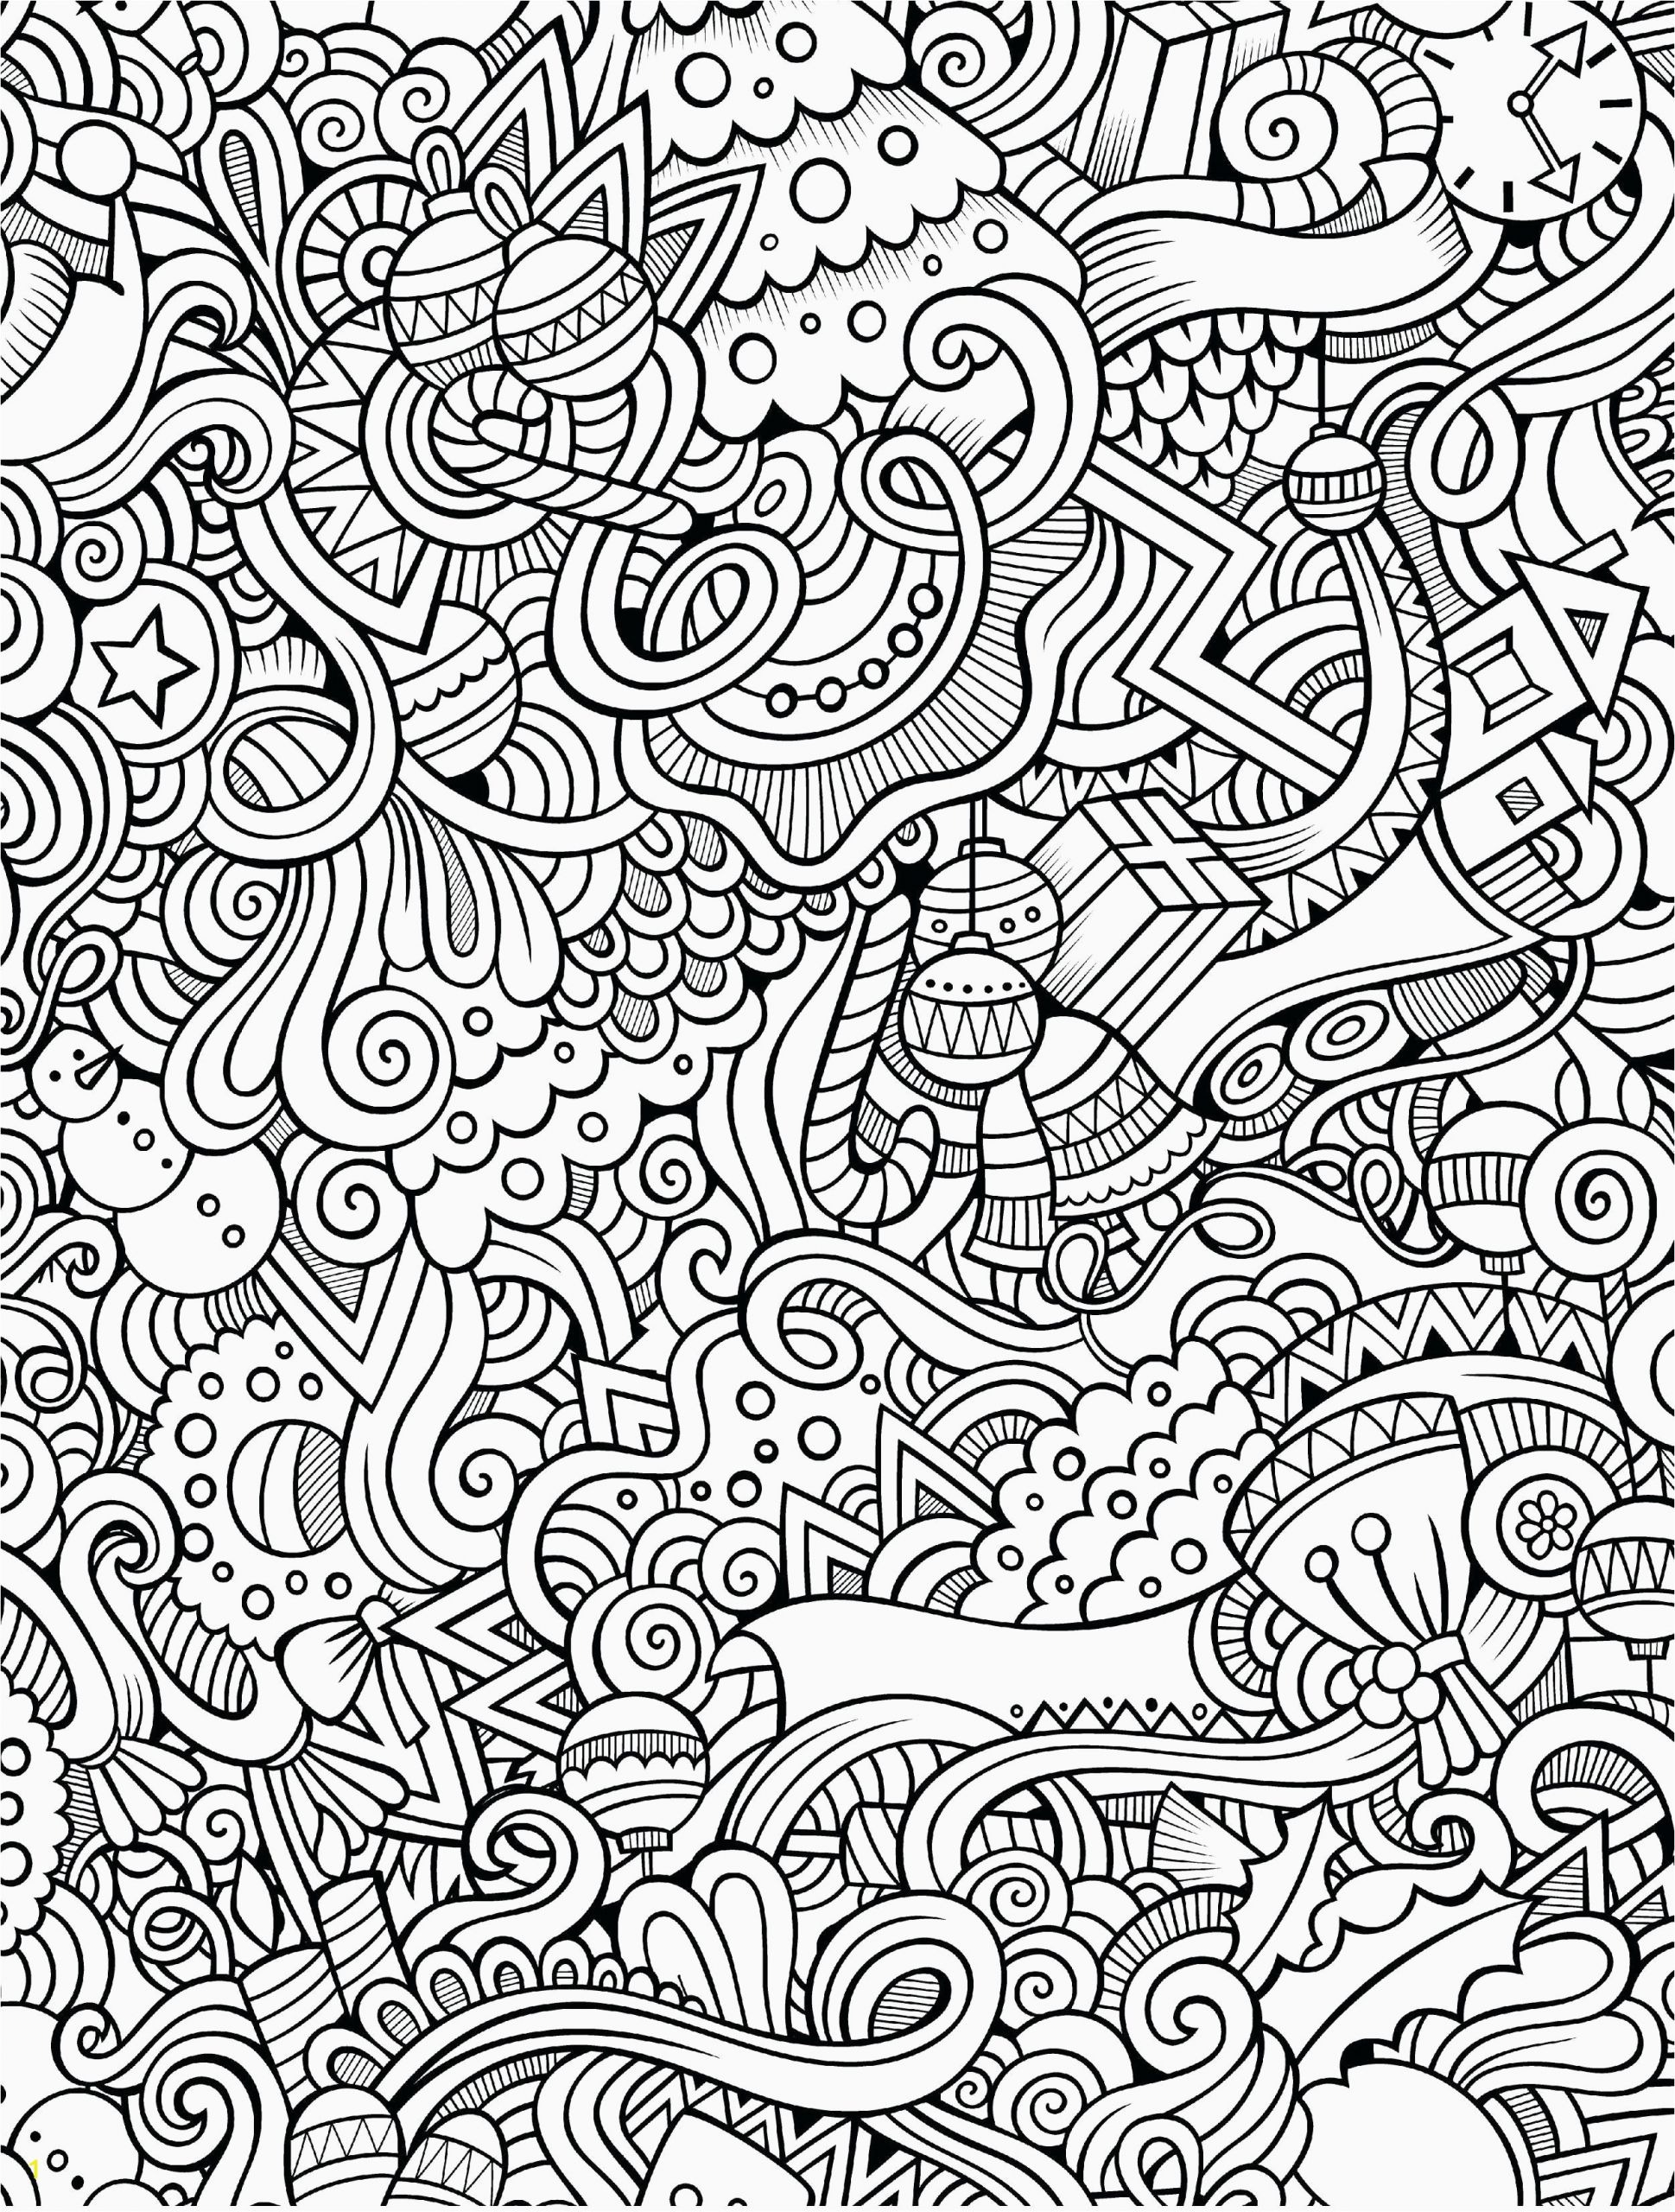 free printable coloring pages for adults simple awesome coloring page for adult od kids simple floral heart with of free printable coloring pages for adults simple